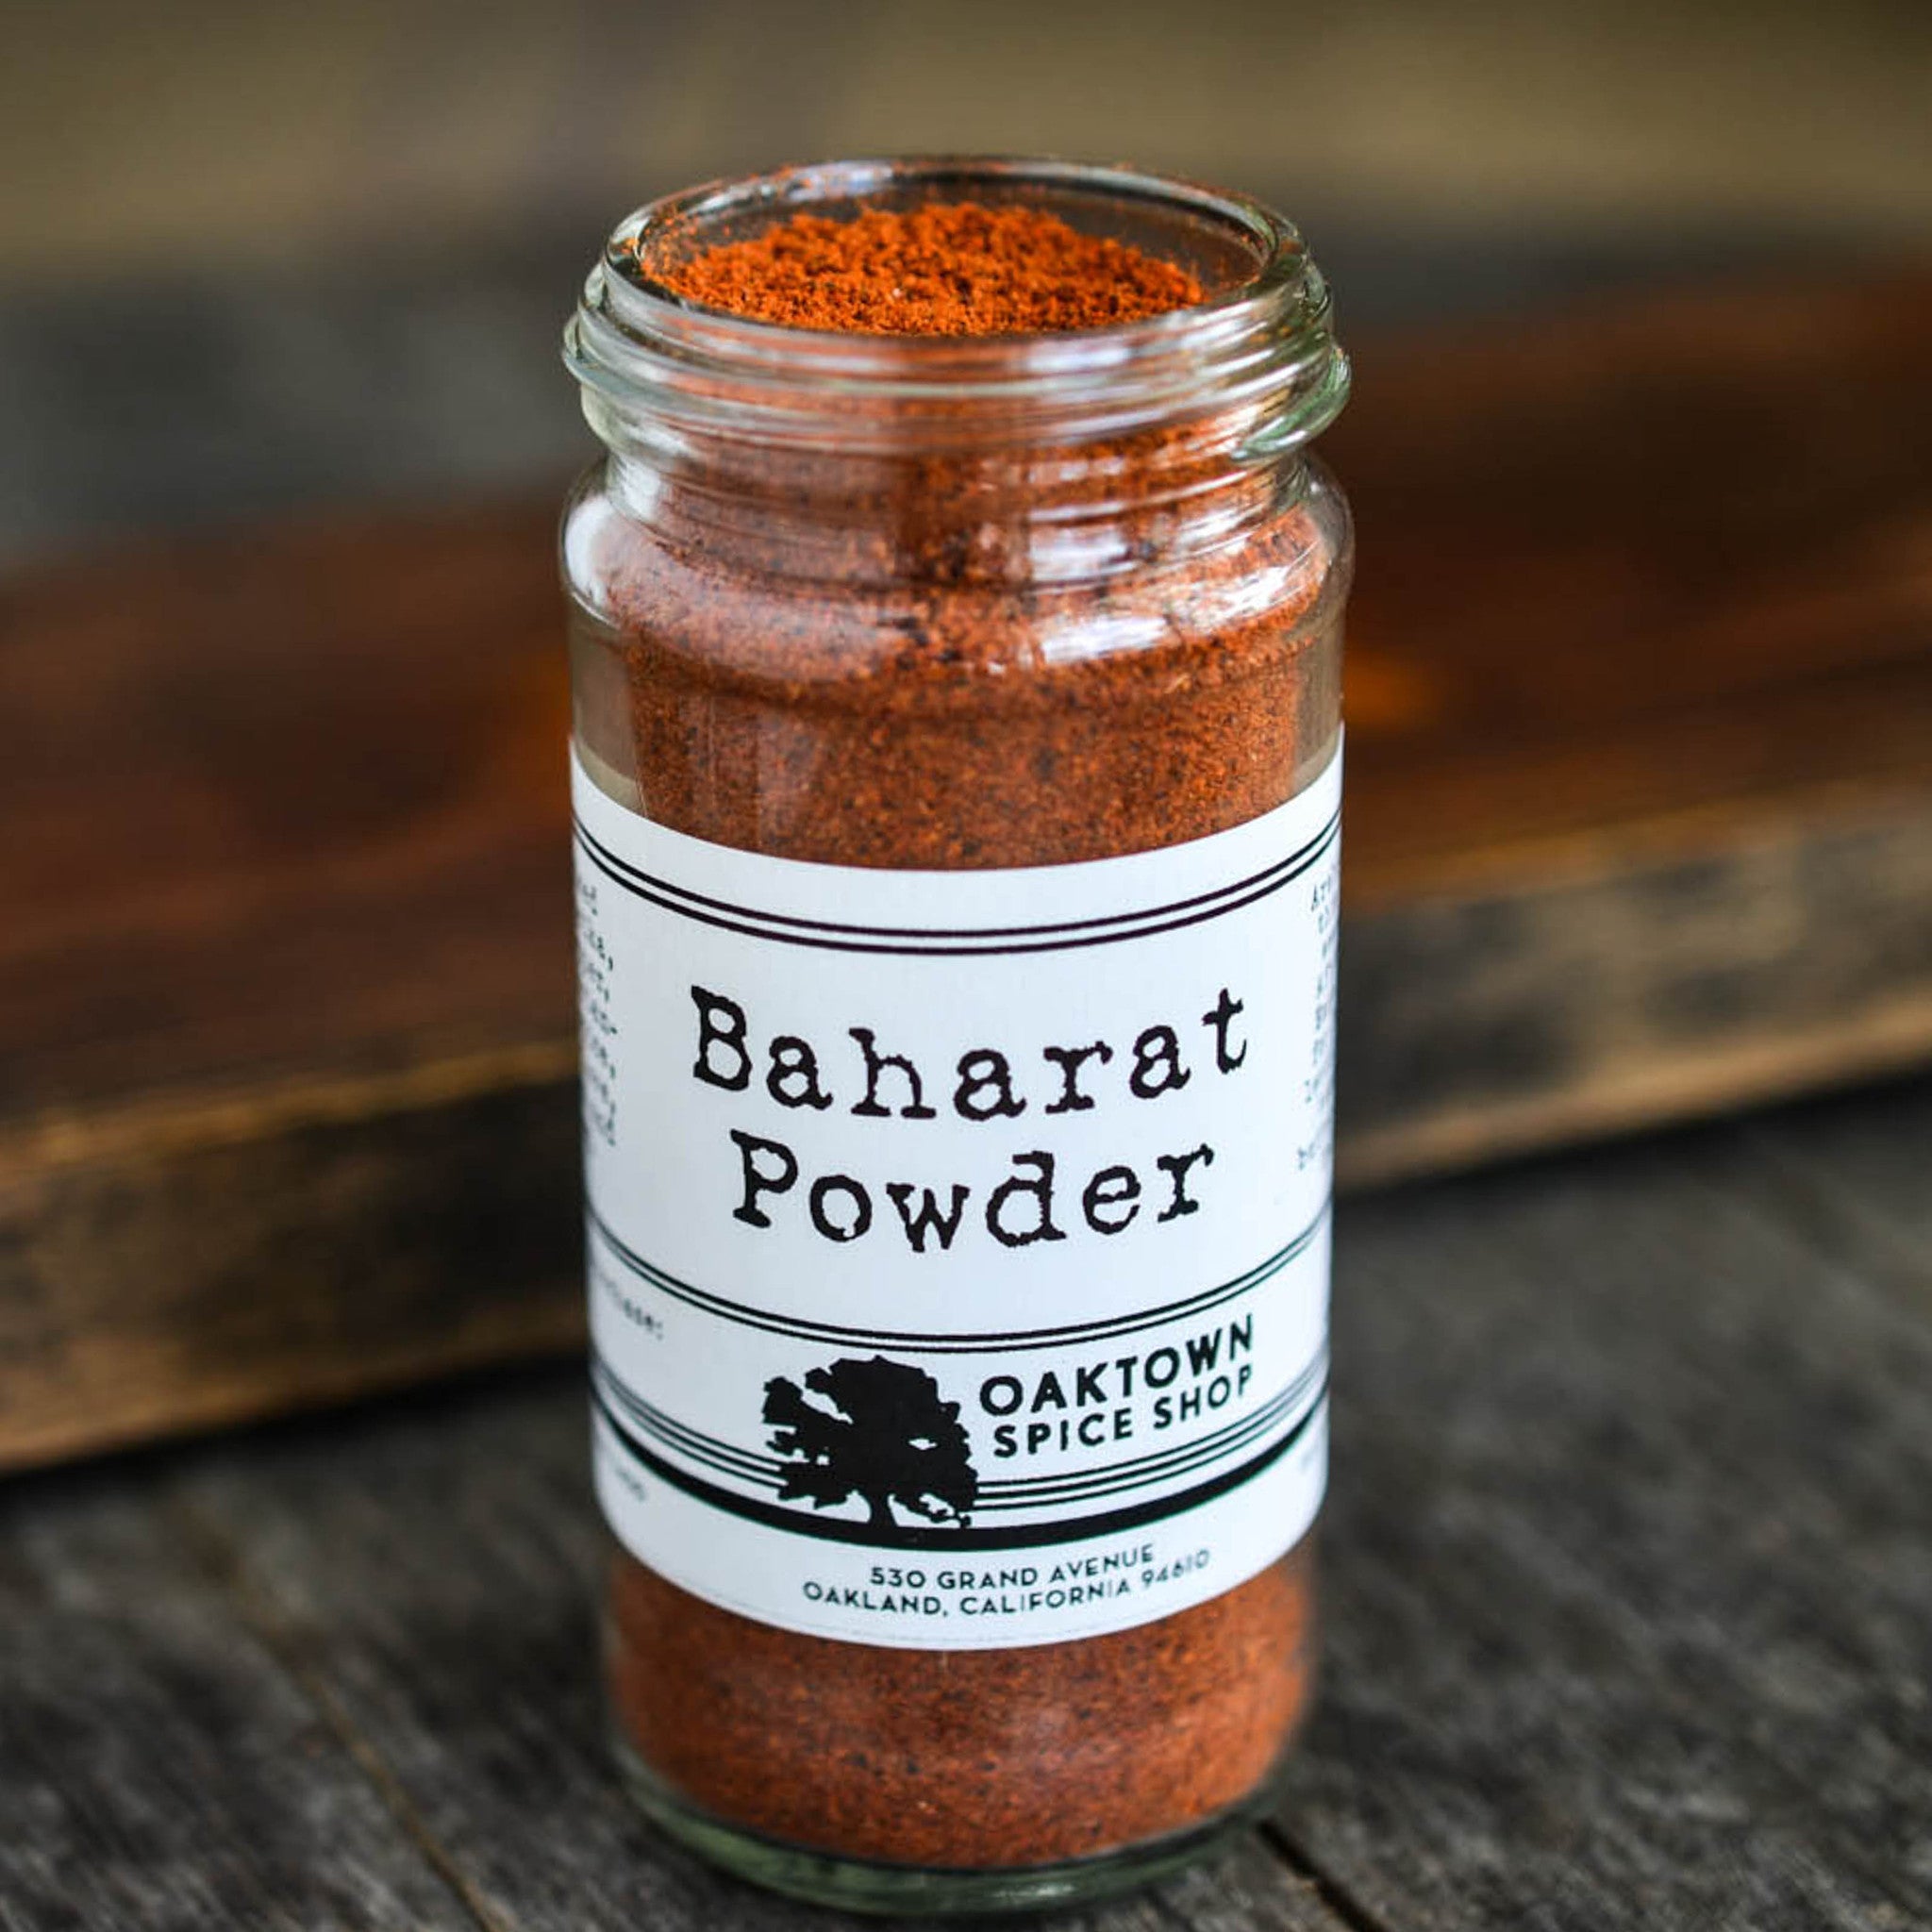 Baharat Powder Fresh Ground Spice is a Flavor of North Africa and the Middle East from Oaktown Spice Shop